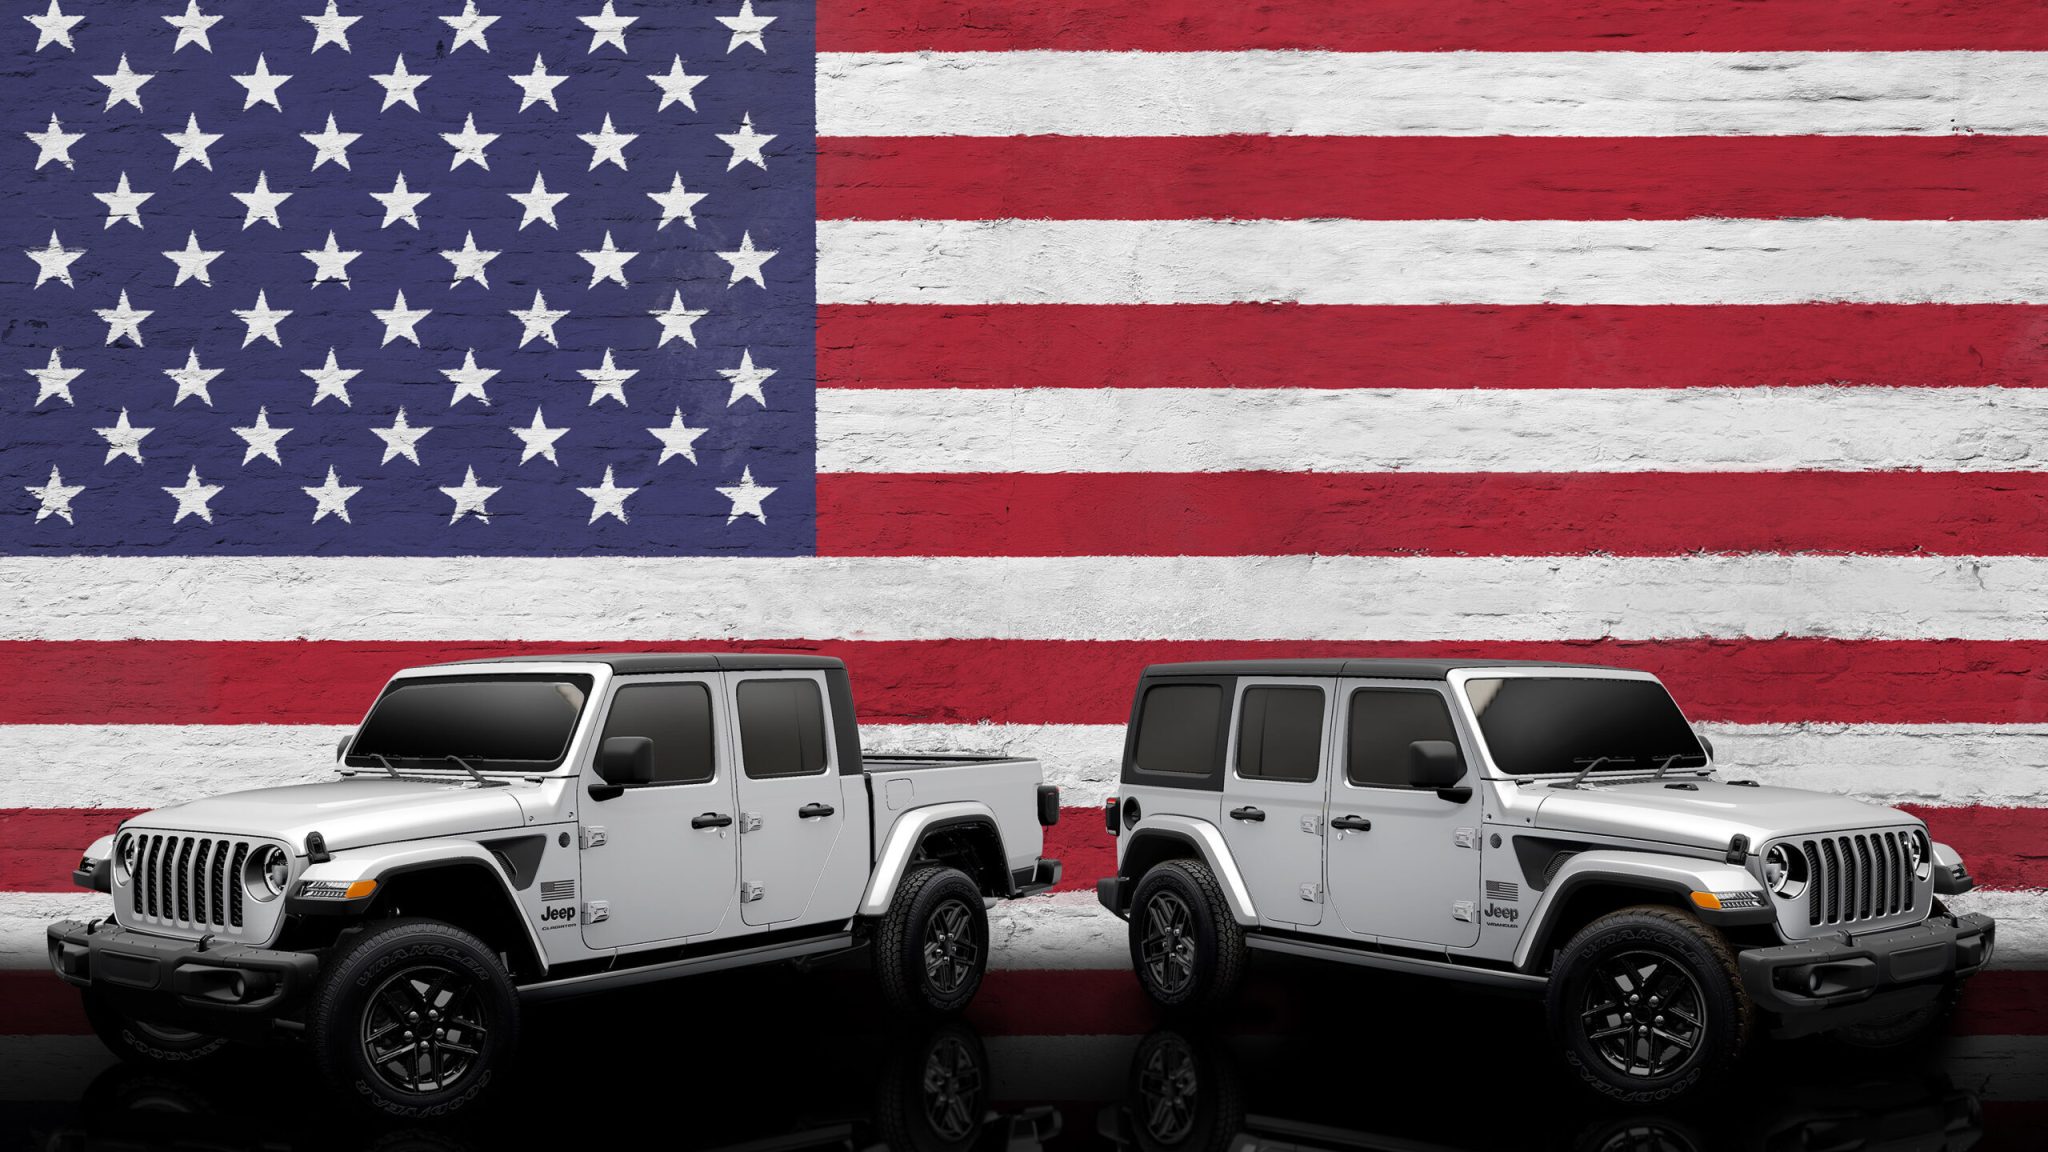 2023-Jeep-Freedom-Editions-scaled-e1657915583318.jpg